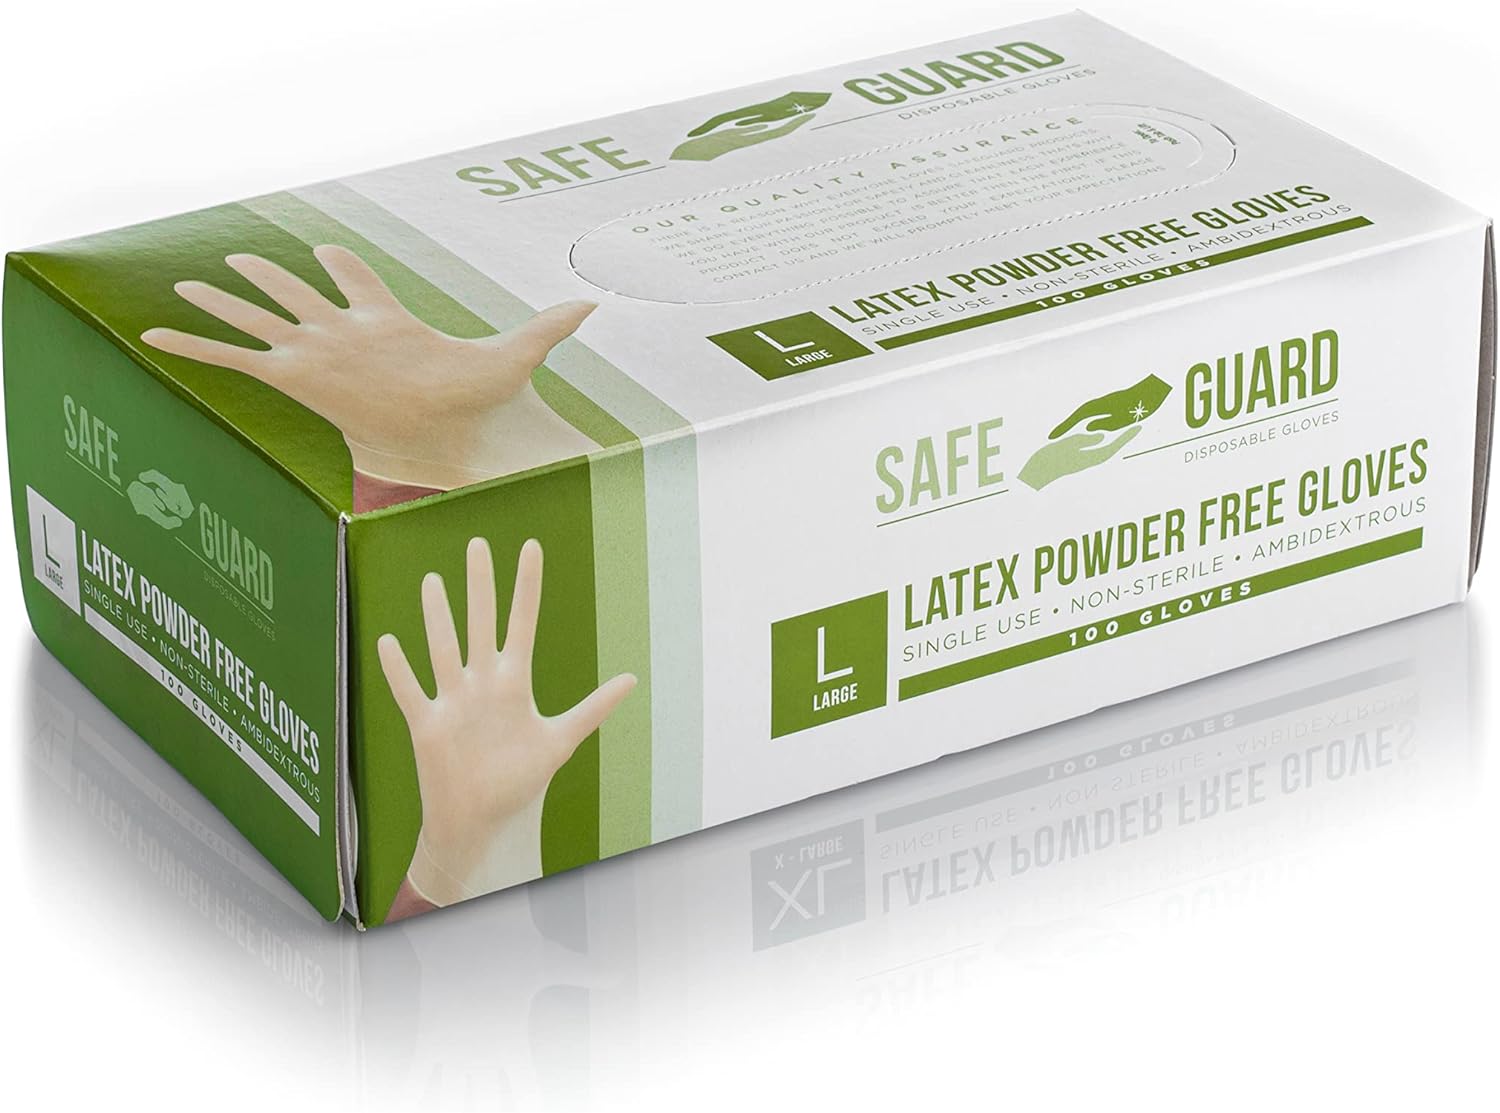 SAFEGUARD LATEX POWER FREE GLOVES